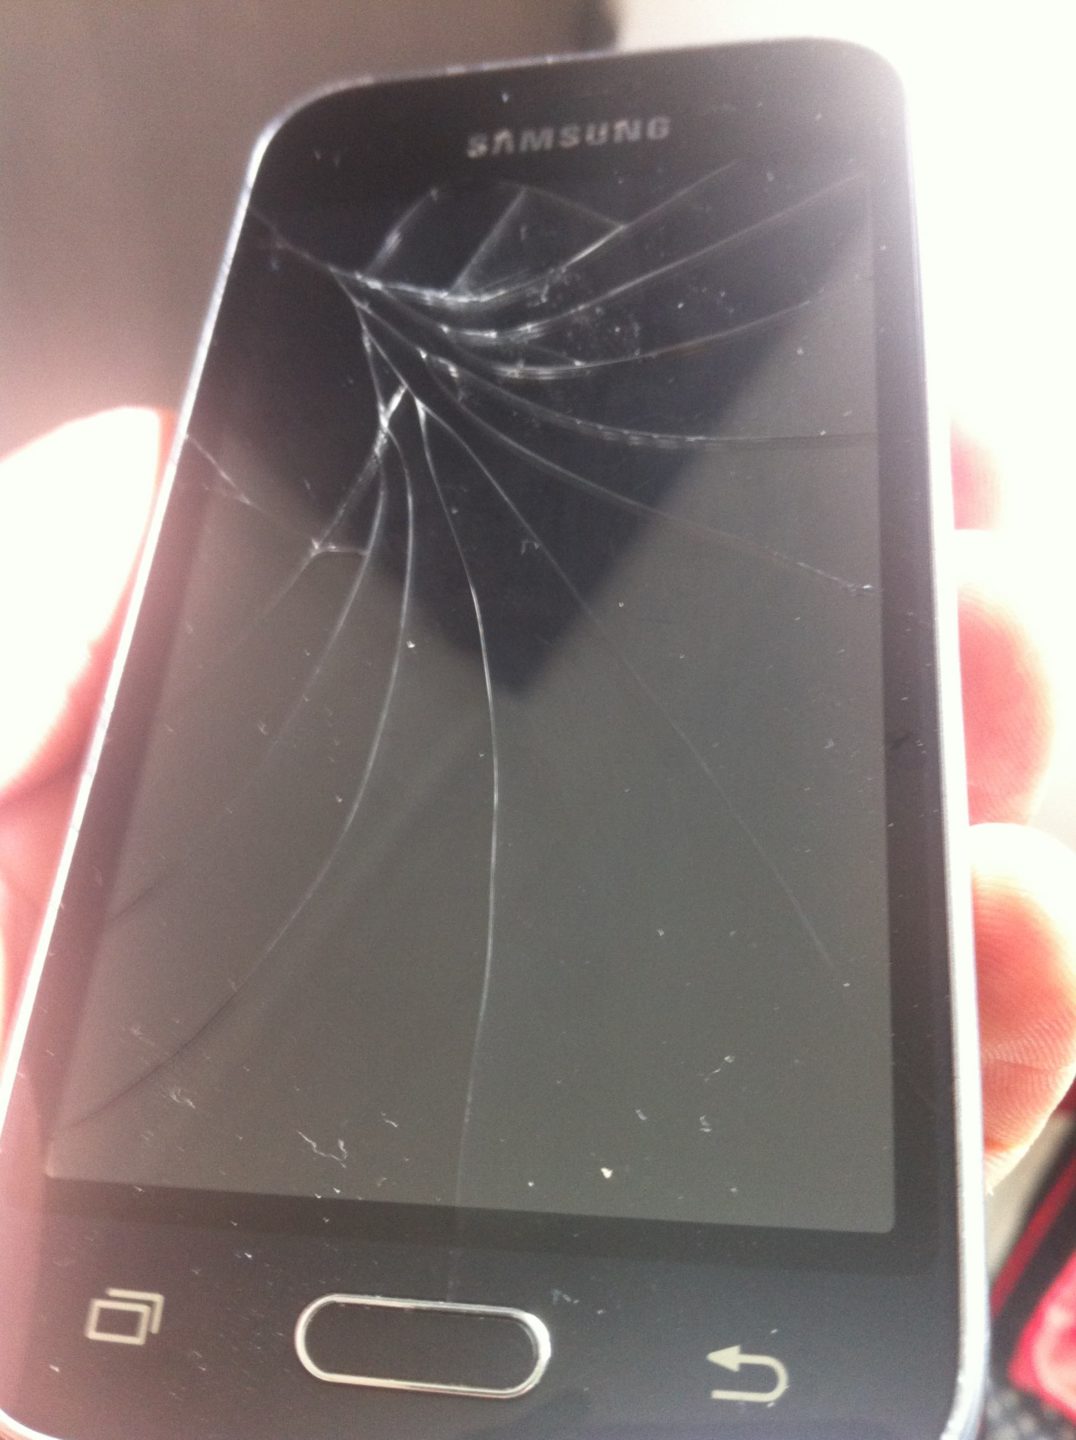 Cracking the screen of your phone and Death = same thing